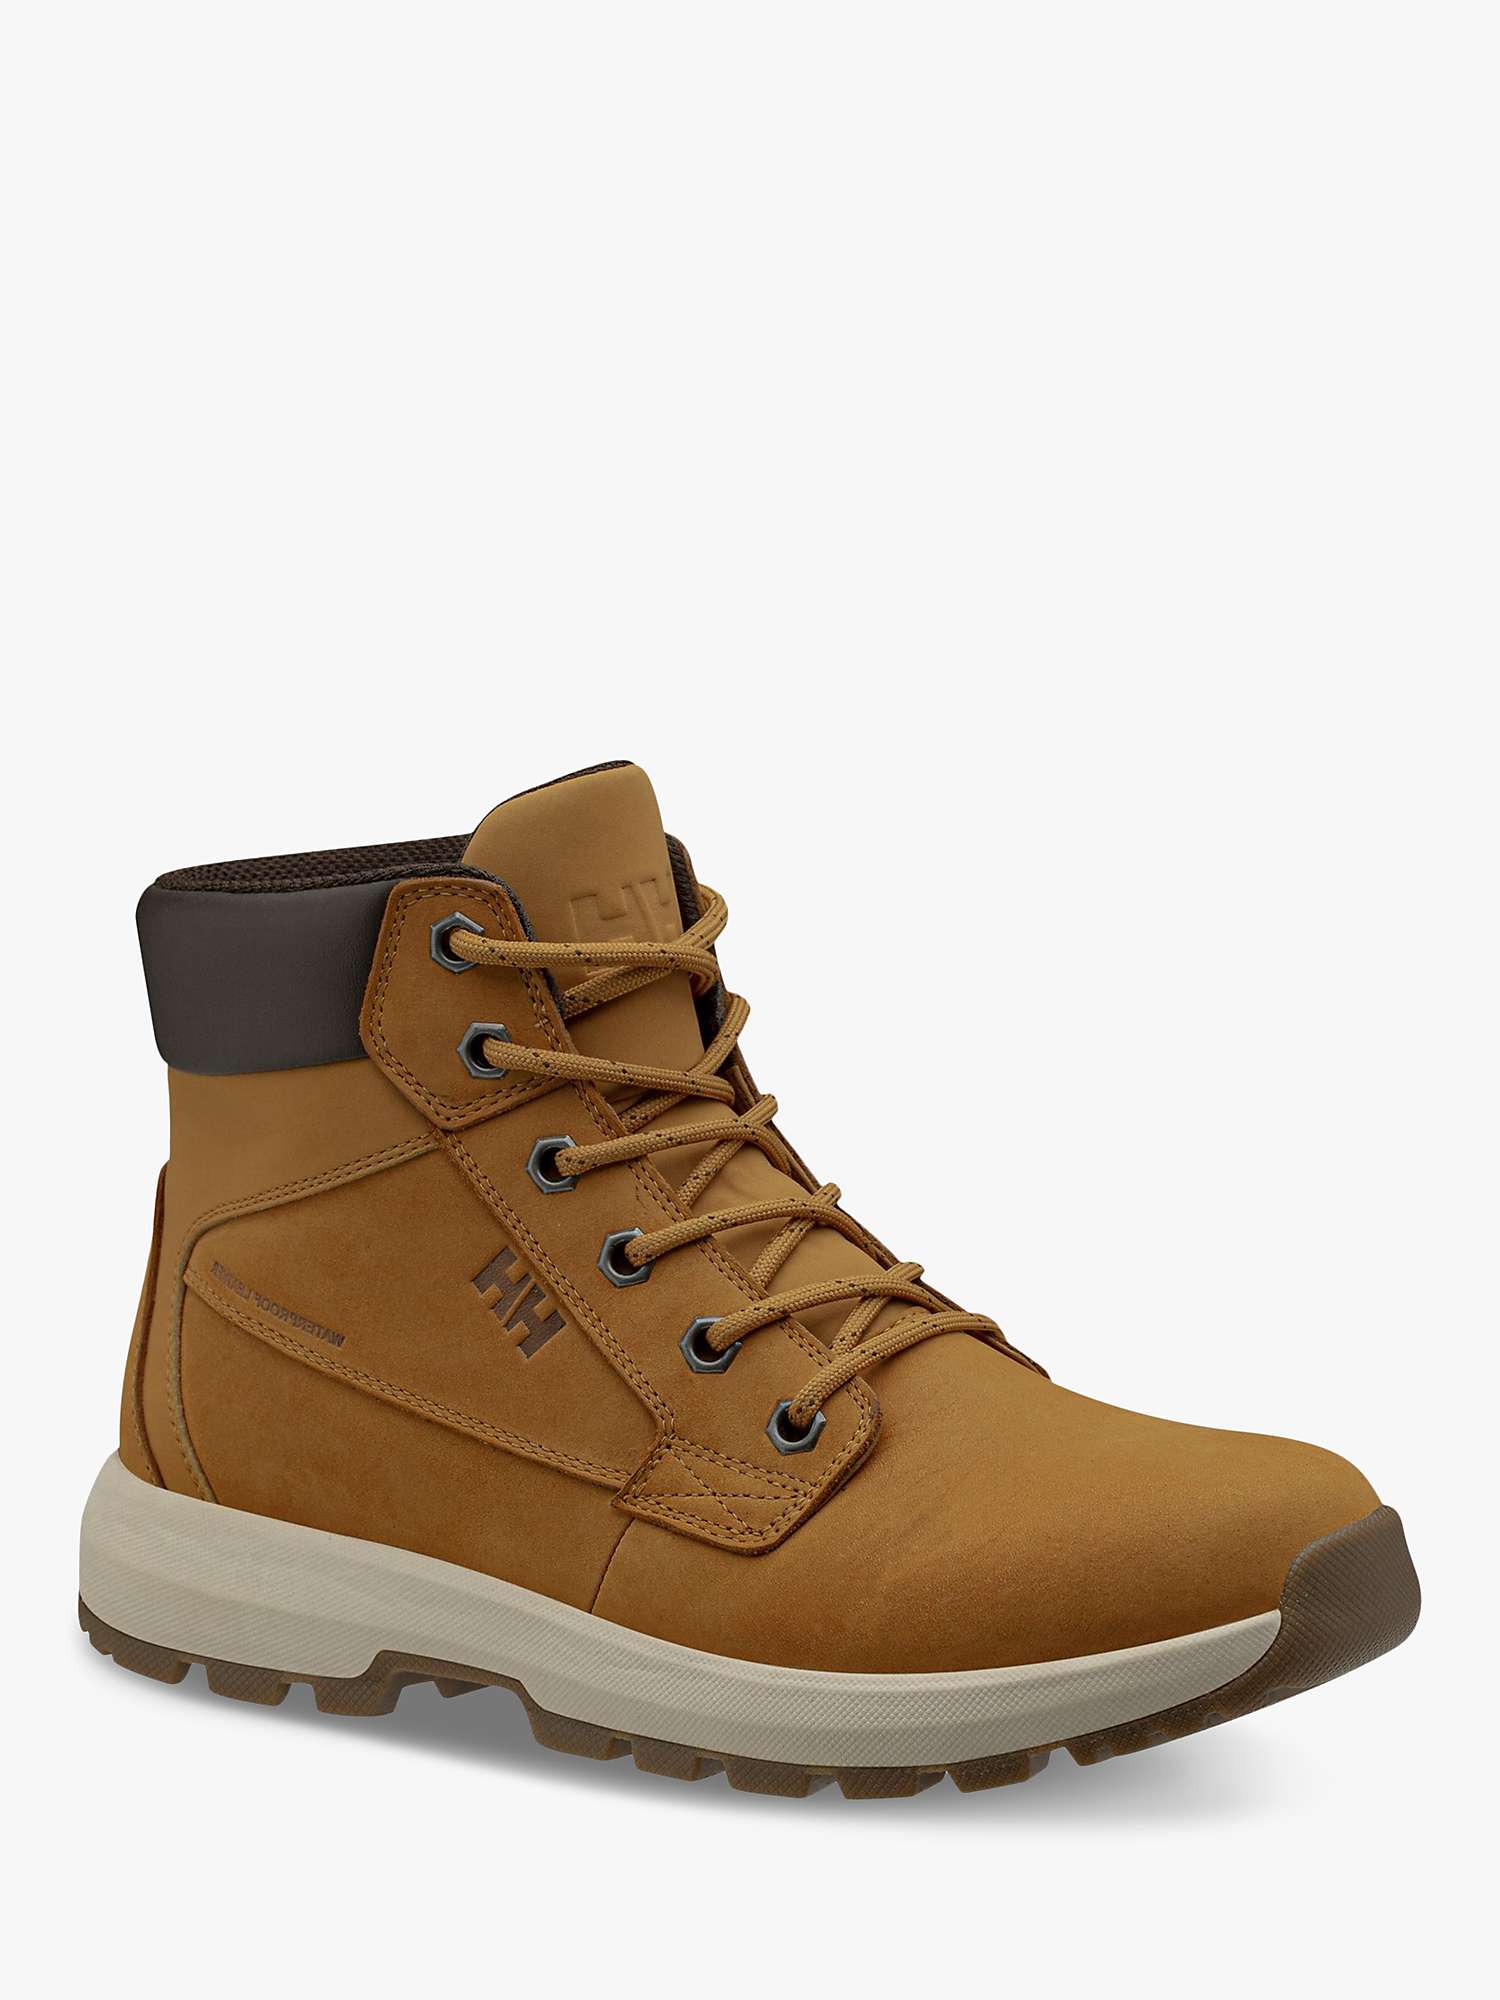 Buy Helly Hansen Bowstring Leather Waterproof Ankle Boots, Honey Online at johnlewis.com